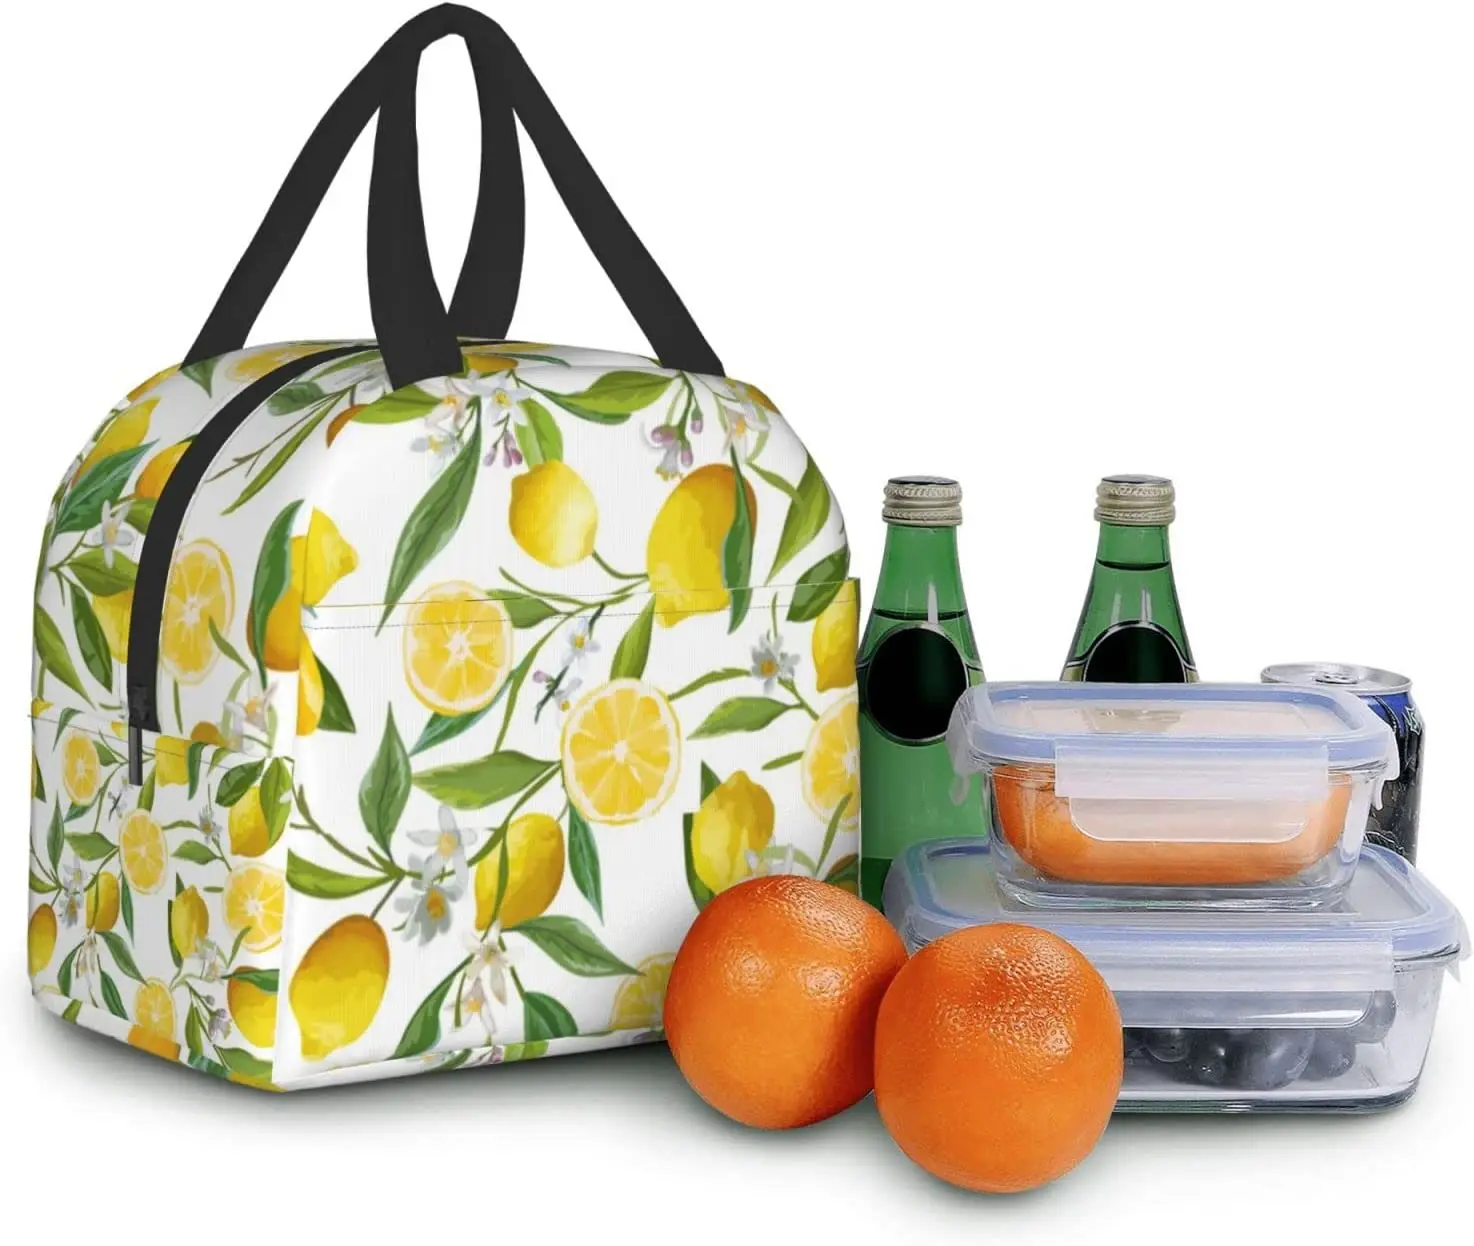 

Lemon Lunch Bag Reusable Insulated Lunch Tote Bag Waterproof Lining Large Capacity Lunchbox for Work School Picnic Fishing